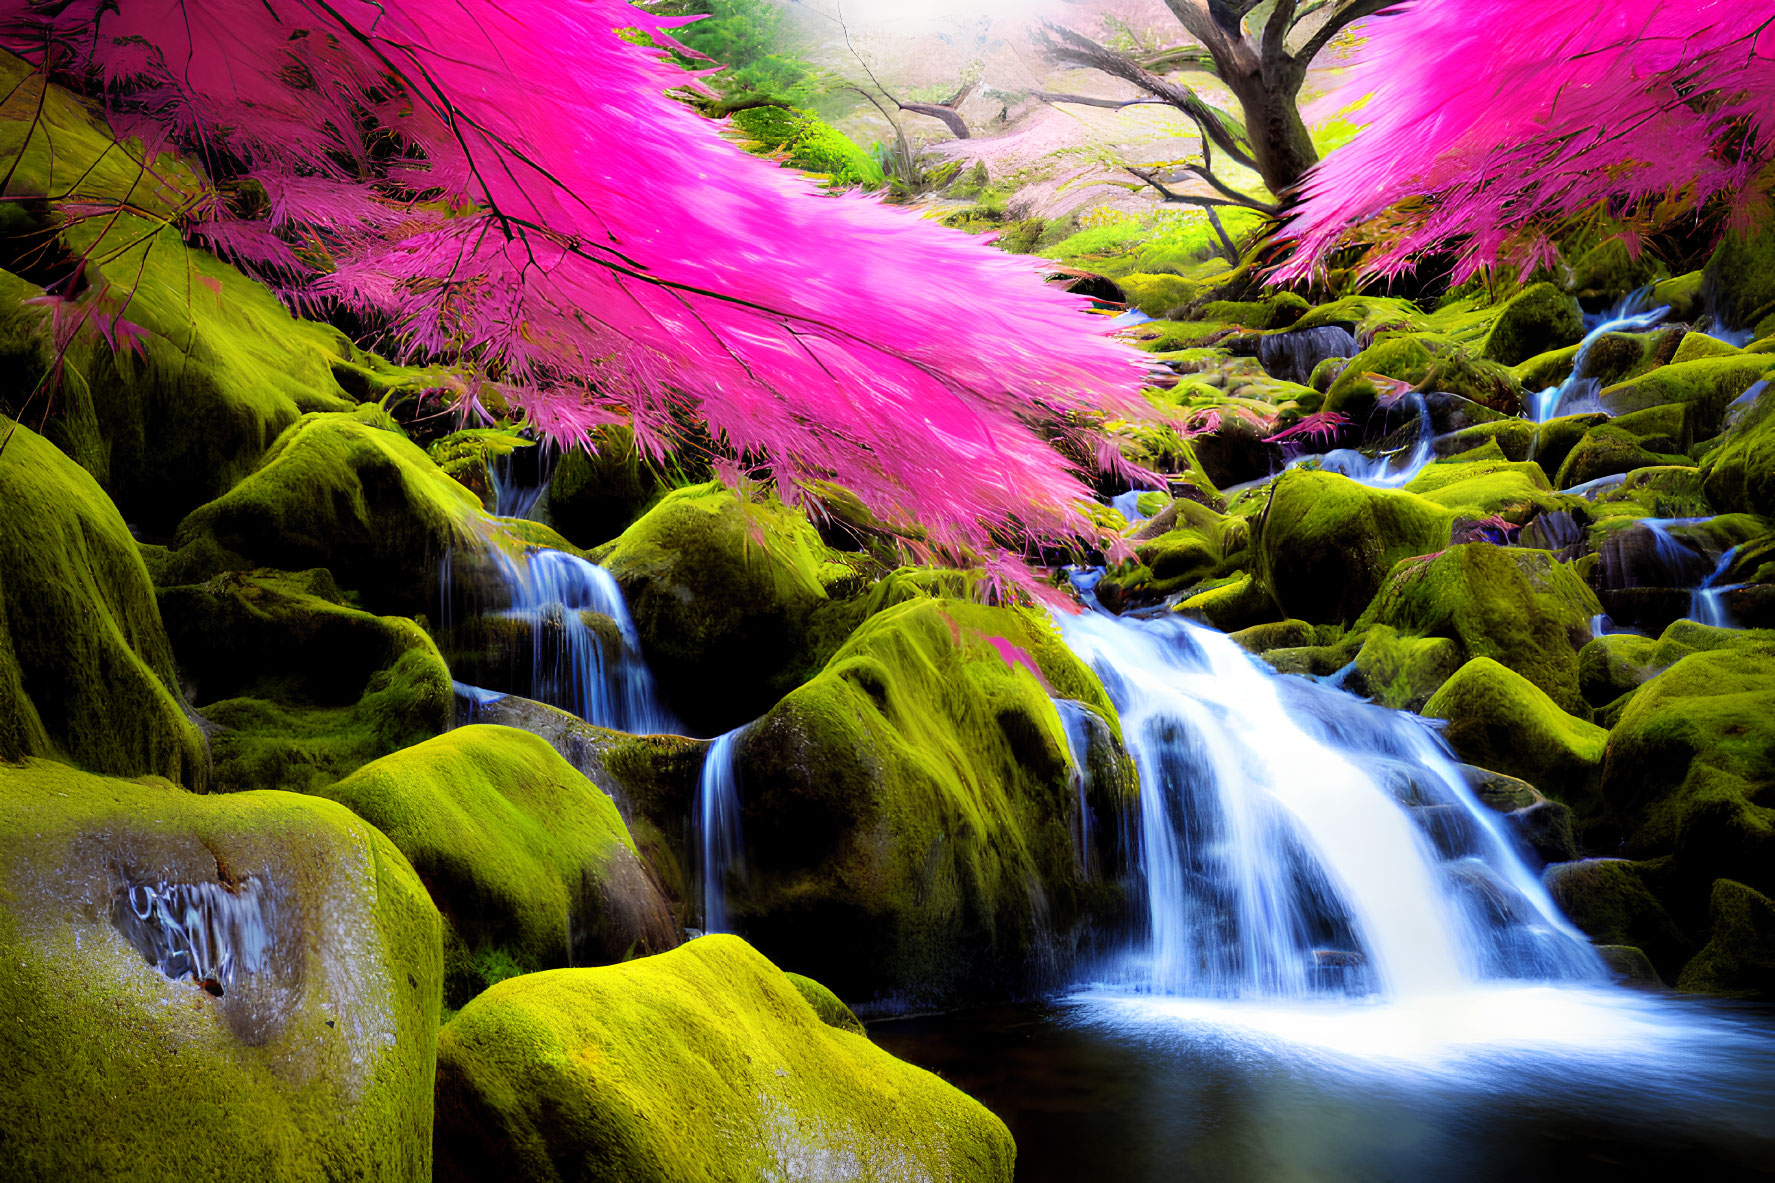 Lush Forest Landscape with Waterfall and Pink Foliage